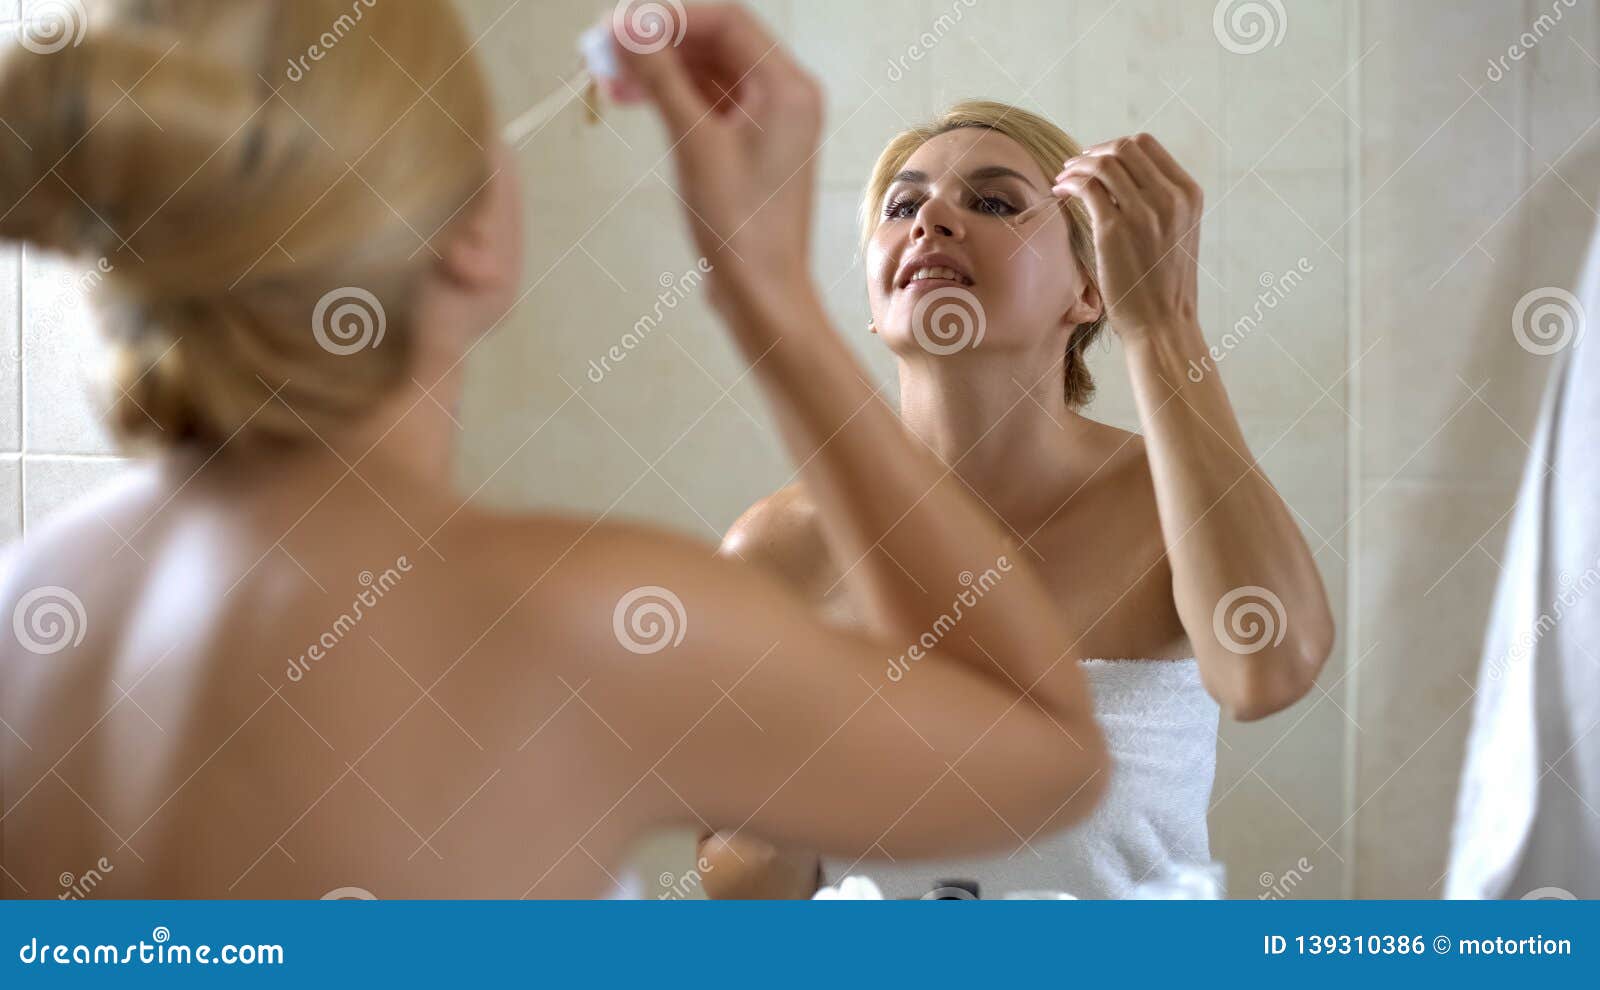 cute lady applies face moisturizer on dry sensitive skin, cosmetology at home